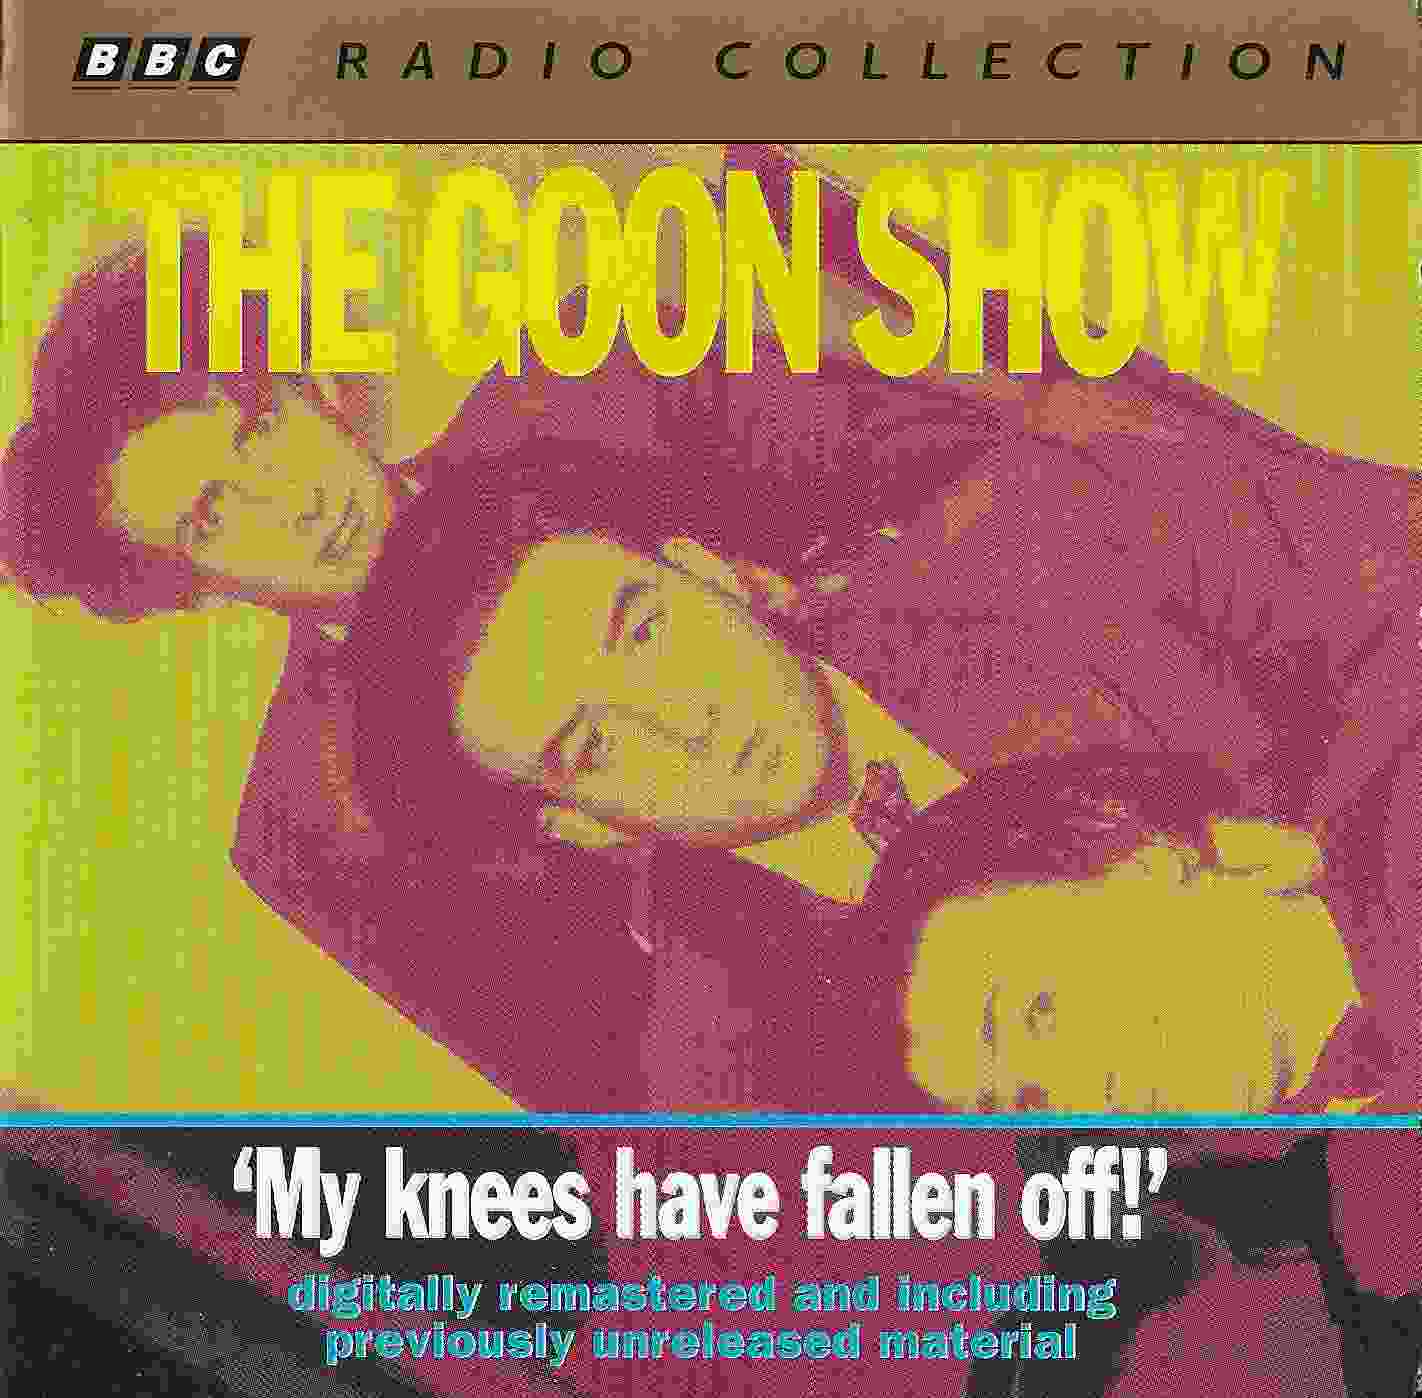 Picture of The Goon show 4 - My knees have fallen off! by artist Spike Milligan / Larry Stephens from the BBC cds - Records and Tapes library